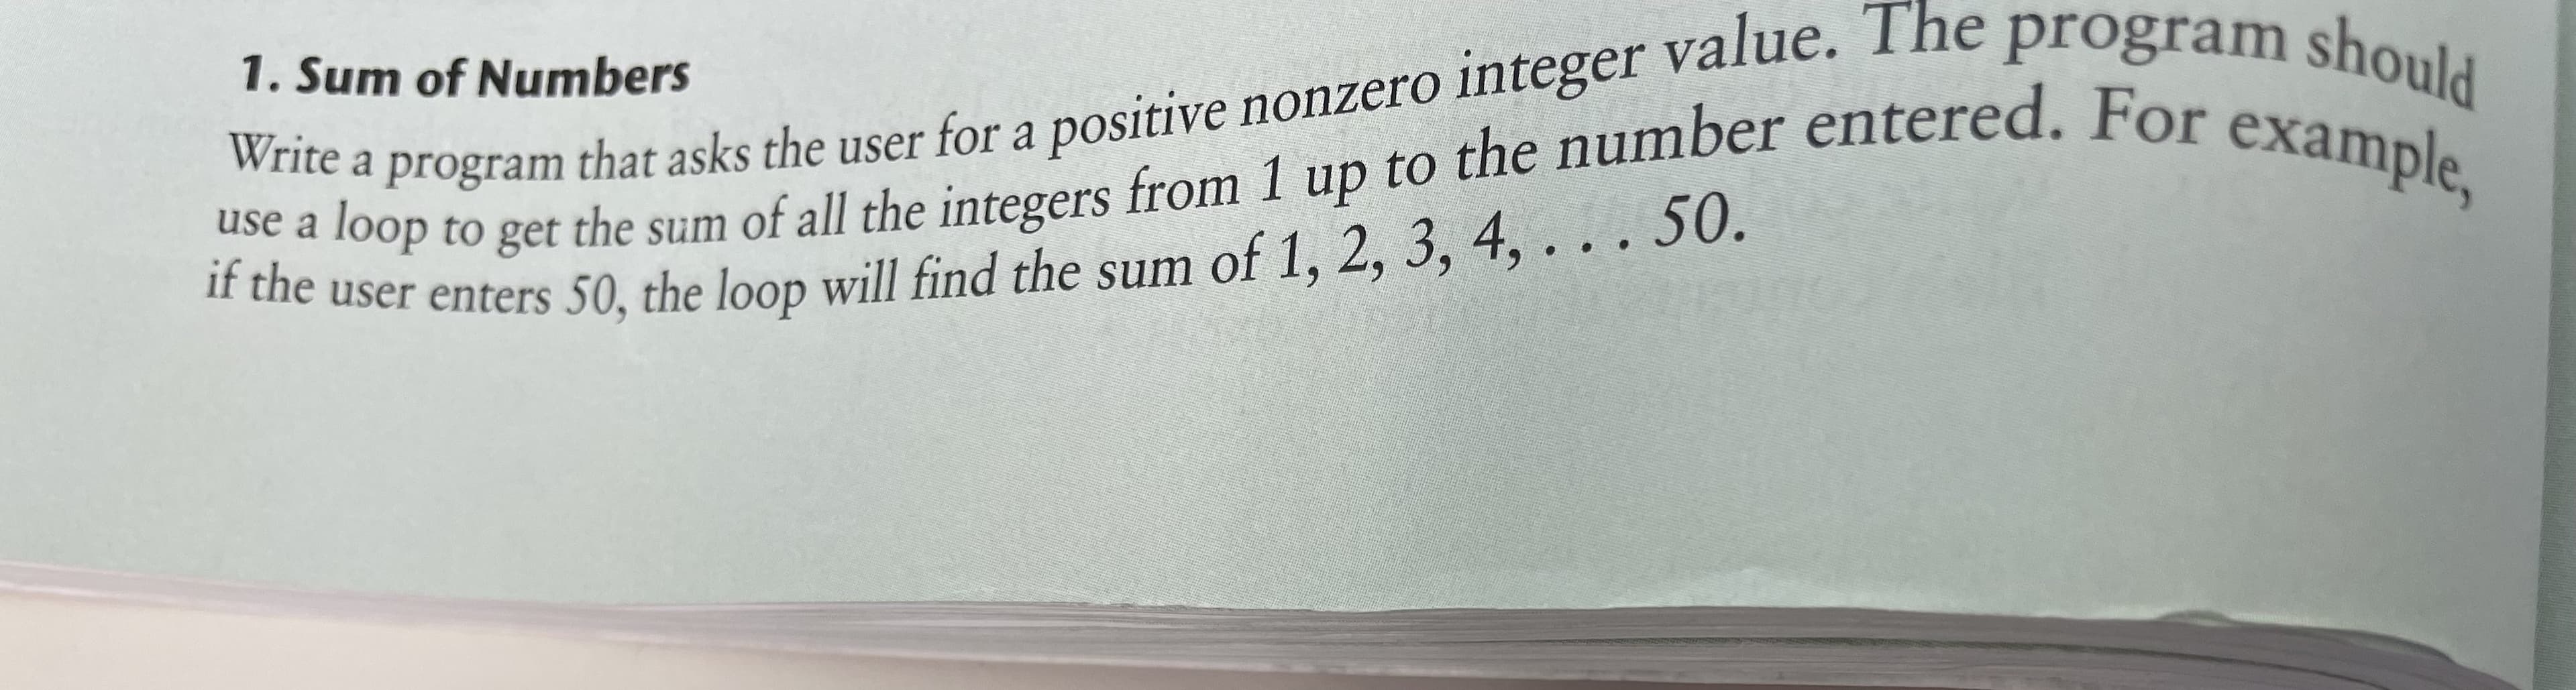 1. Sum of Numbers
write a program that asks the user for a positive nonzero integer value. The program sh
sc a loop to get the sum of all the integers from 1 up to the number entered. For exauld
" the user enters 50, the loop will find the sum of 1, 2, 3, 4, . ..50.
example,
